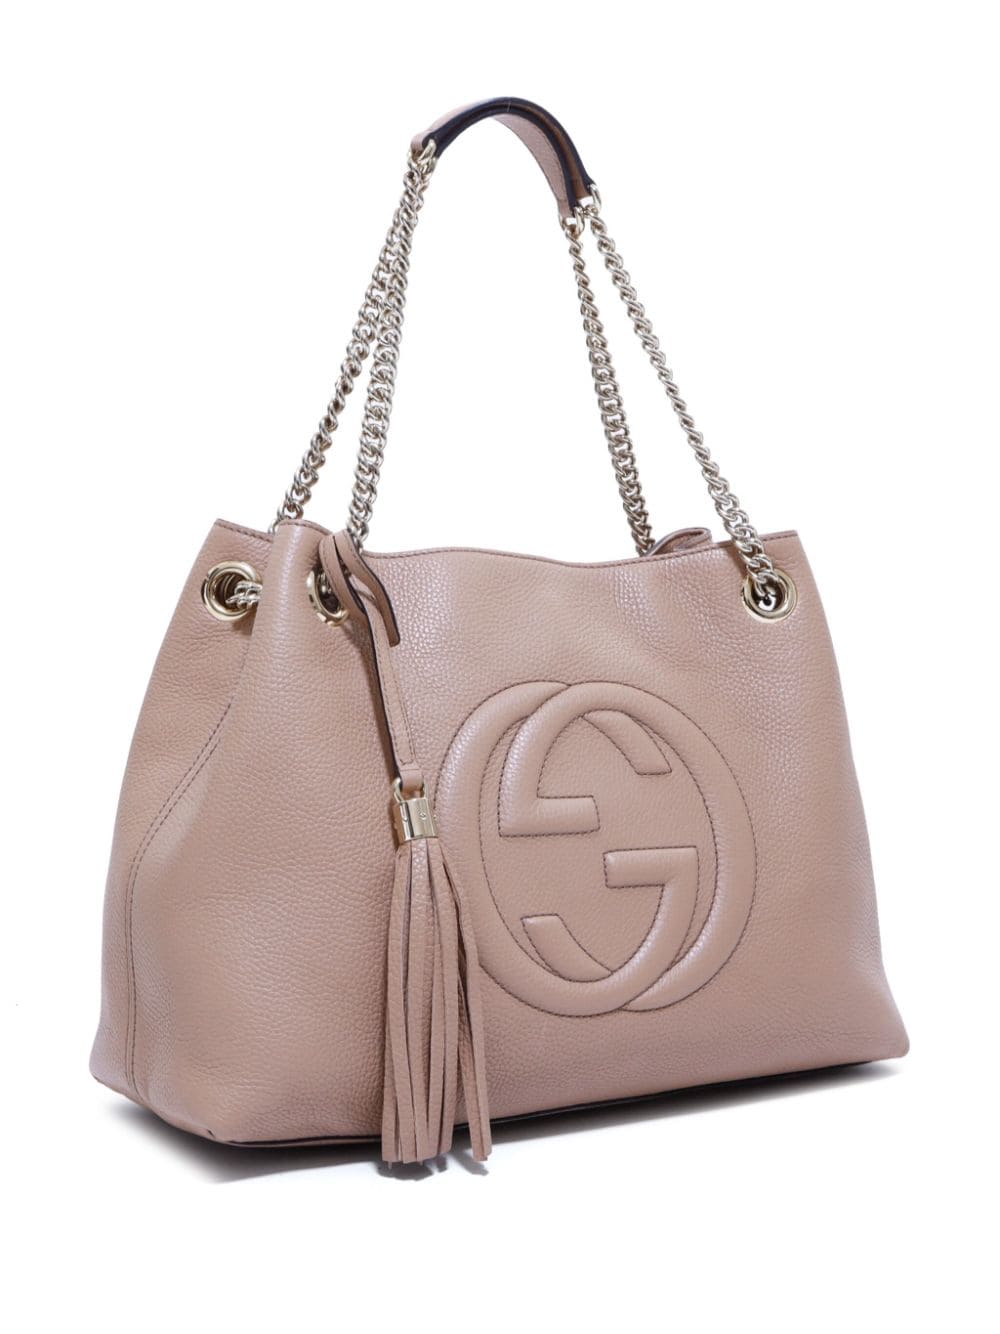 Pre-owned Gucci Soho Leather Tote Bag In Neutrals